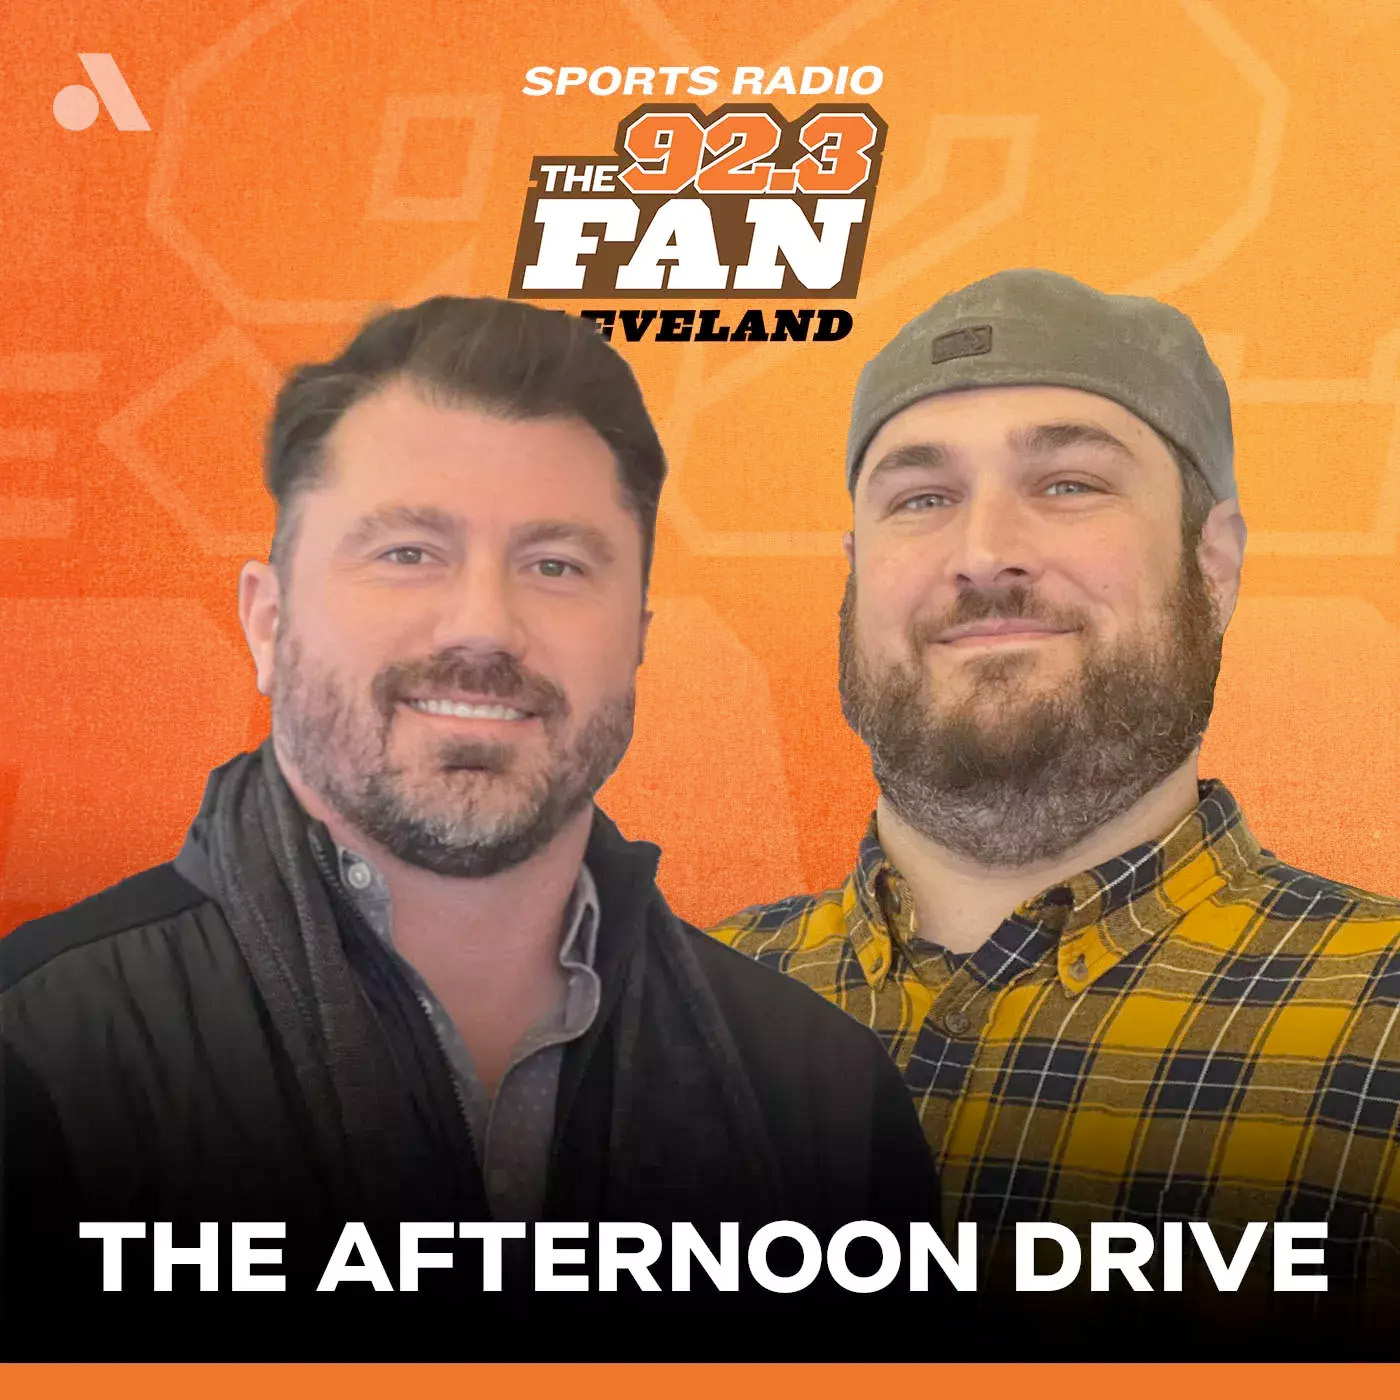 Guardians manager Stephen Vogt joins Afternoon Drive: We're going to have a lot of fun, there's a ton of talent in this organization